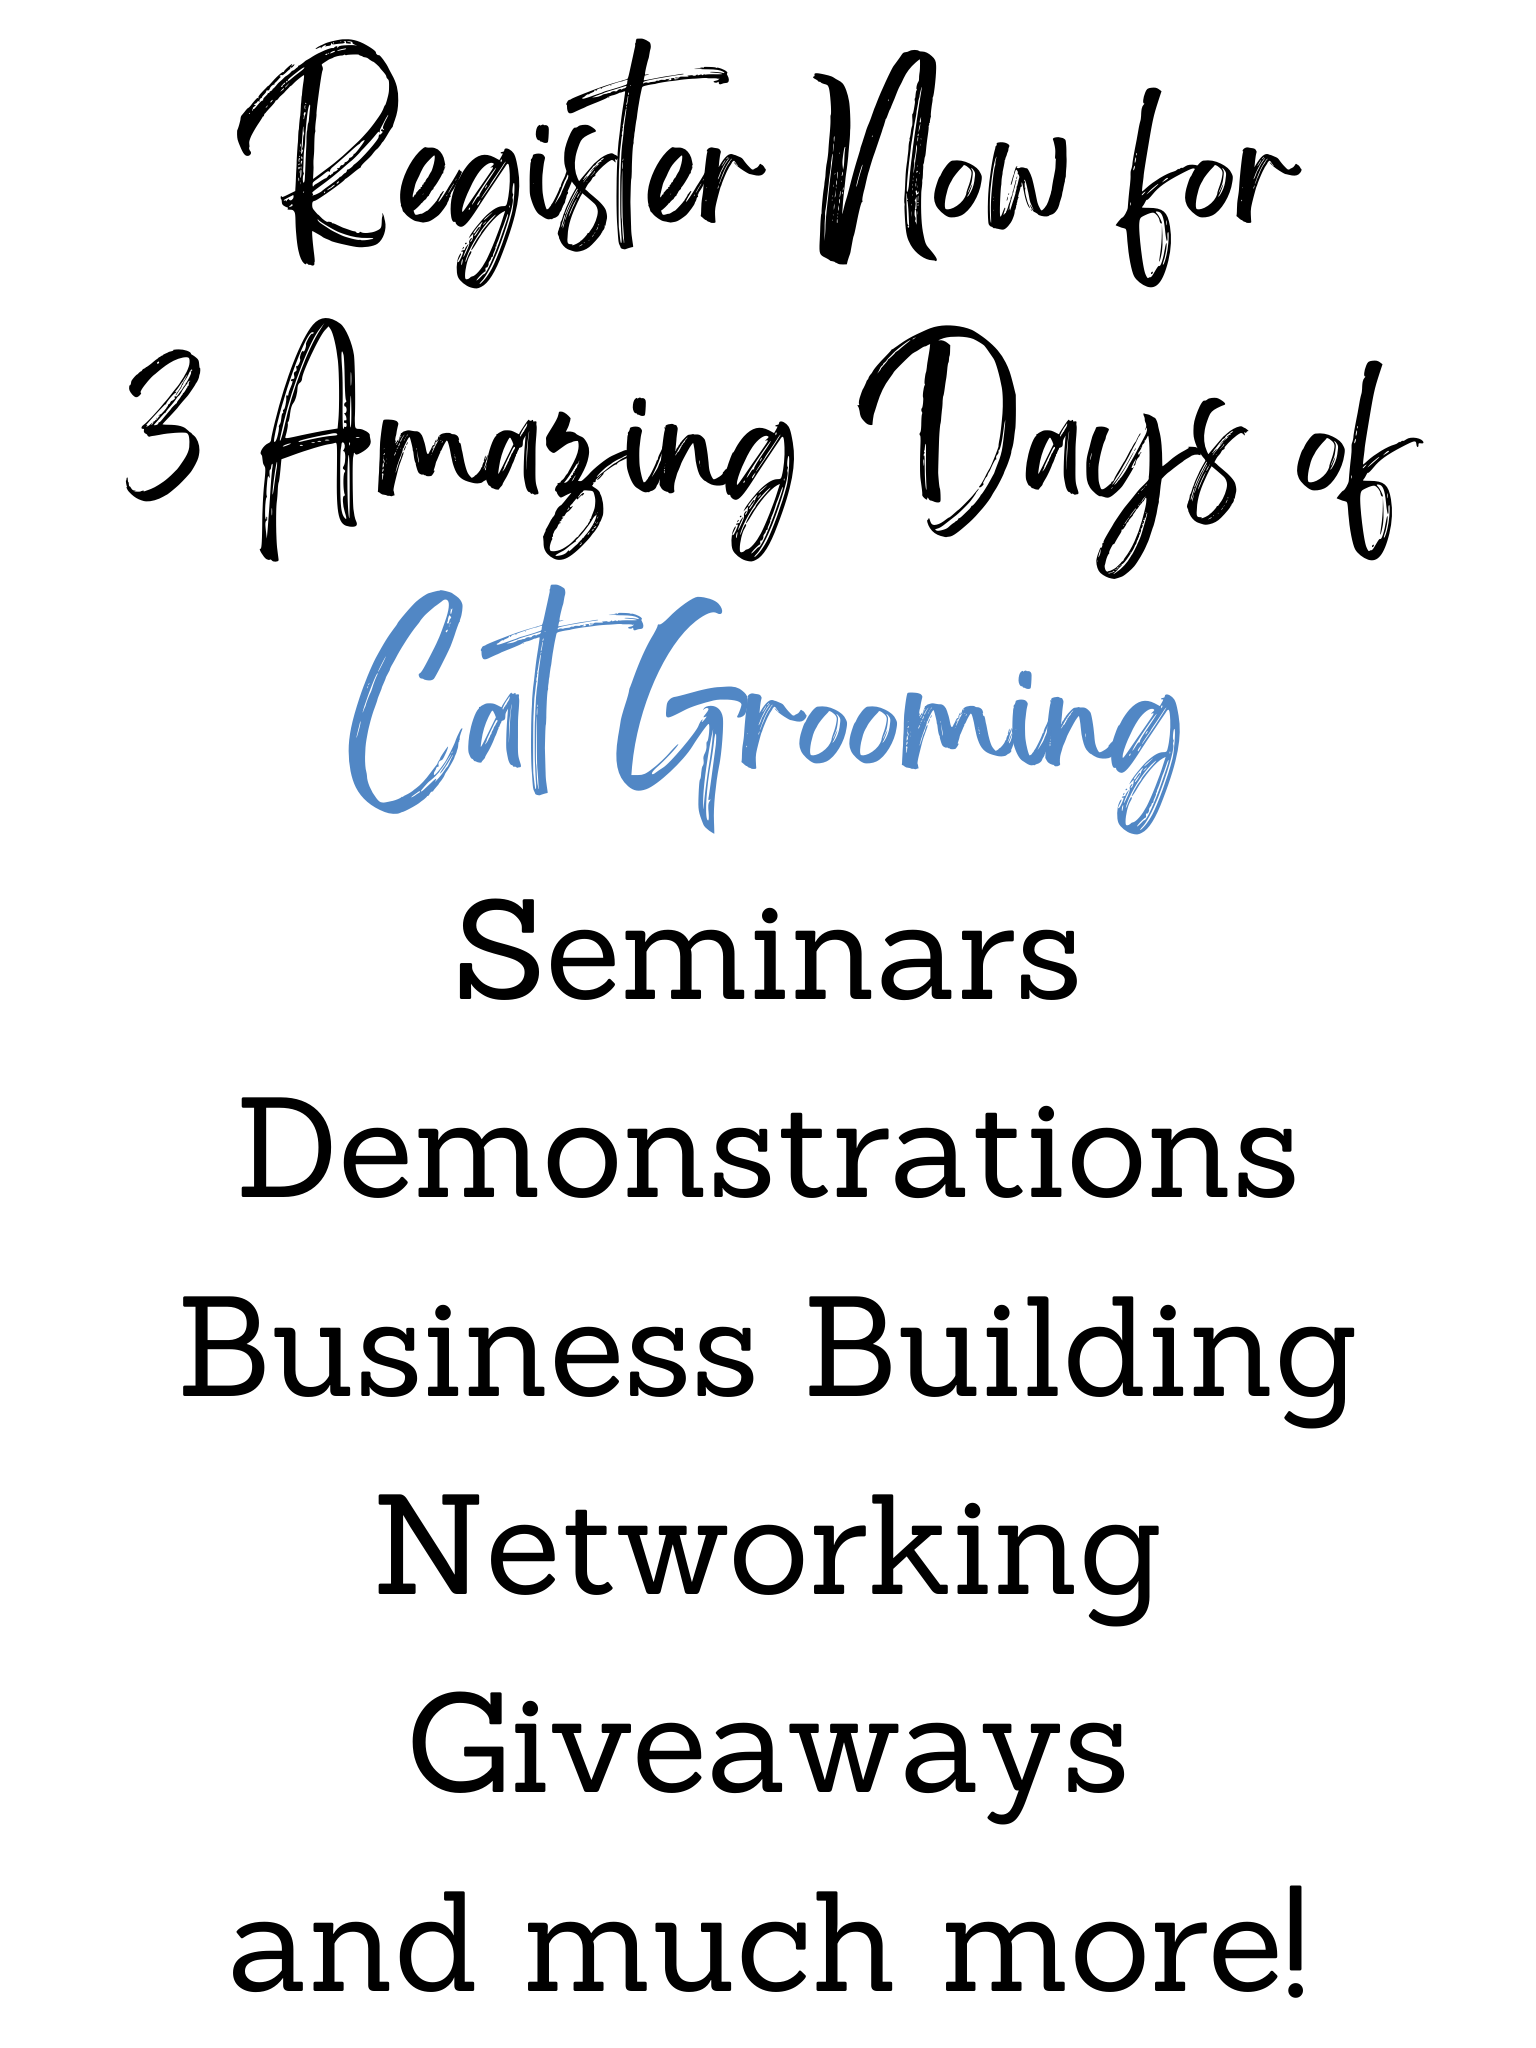 Register Now for 3 Amazing Days of Cat Grooming Seminars Demonstrations Business Building Networking Giveaways and much more!